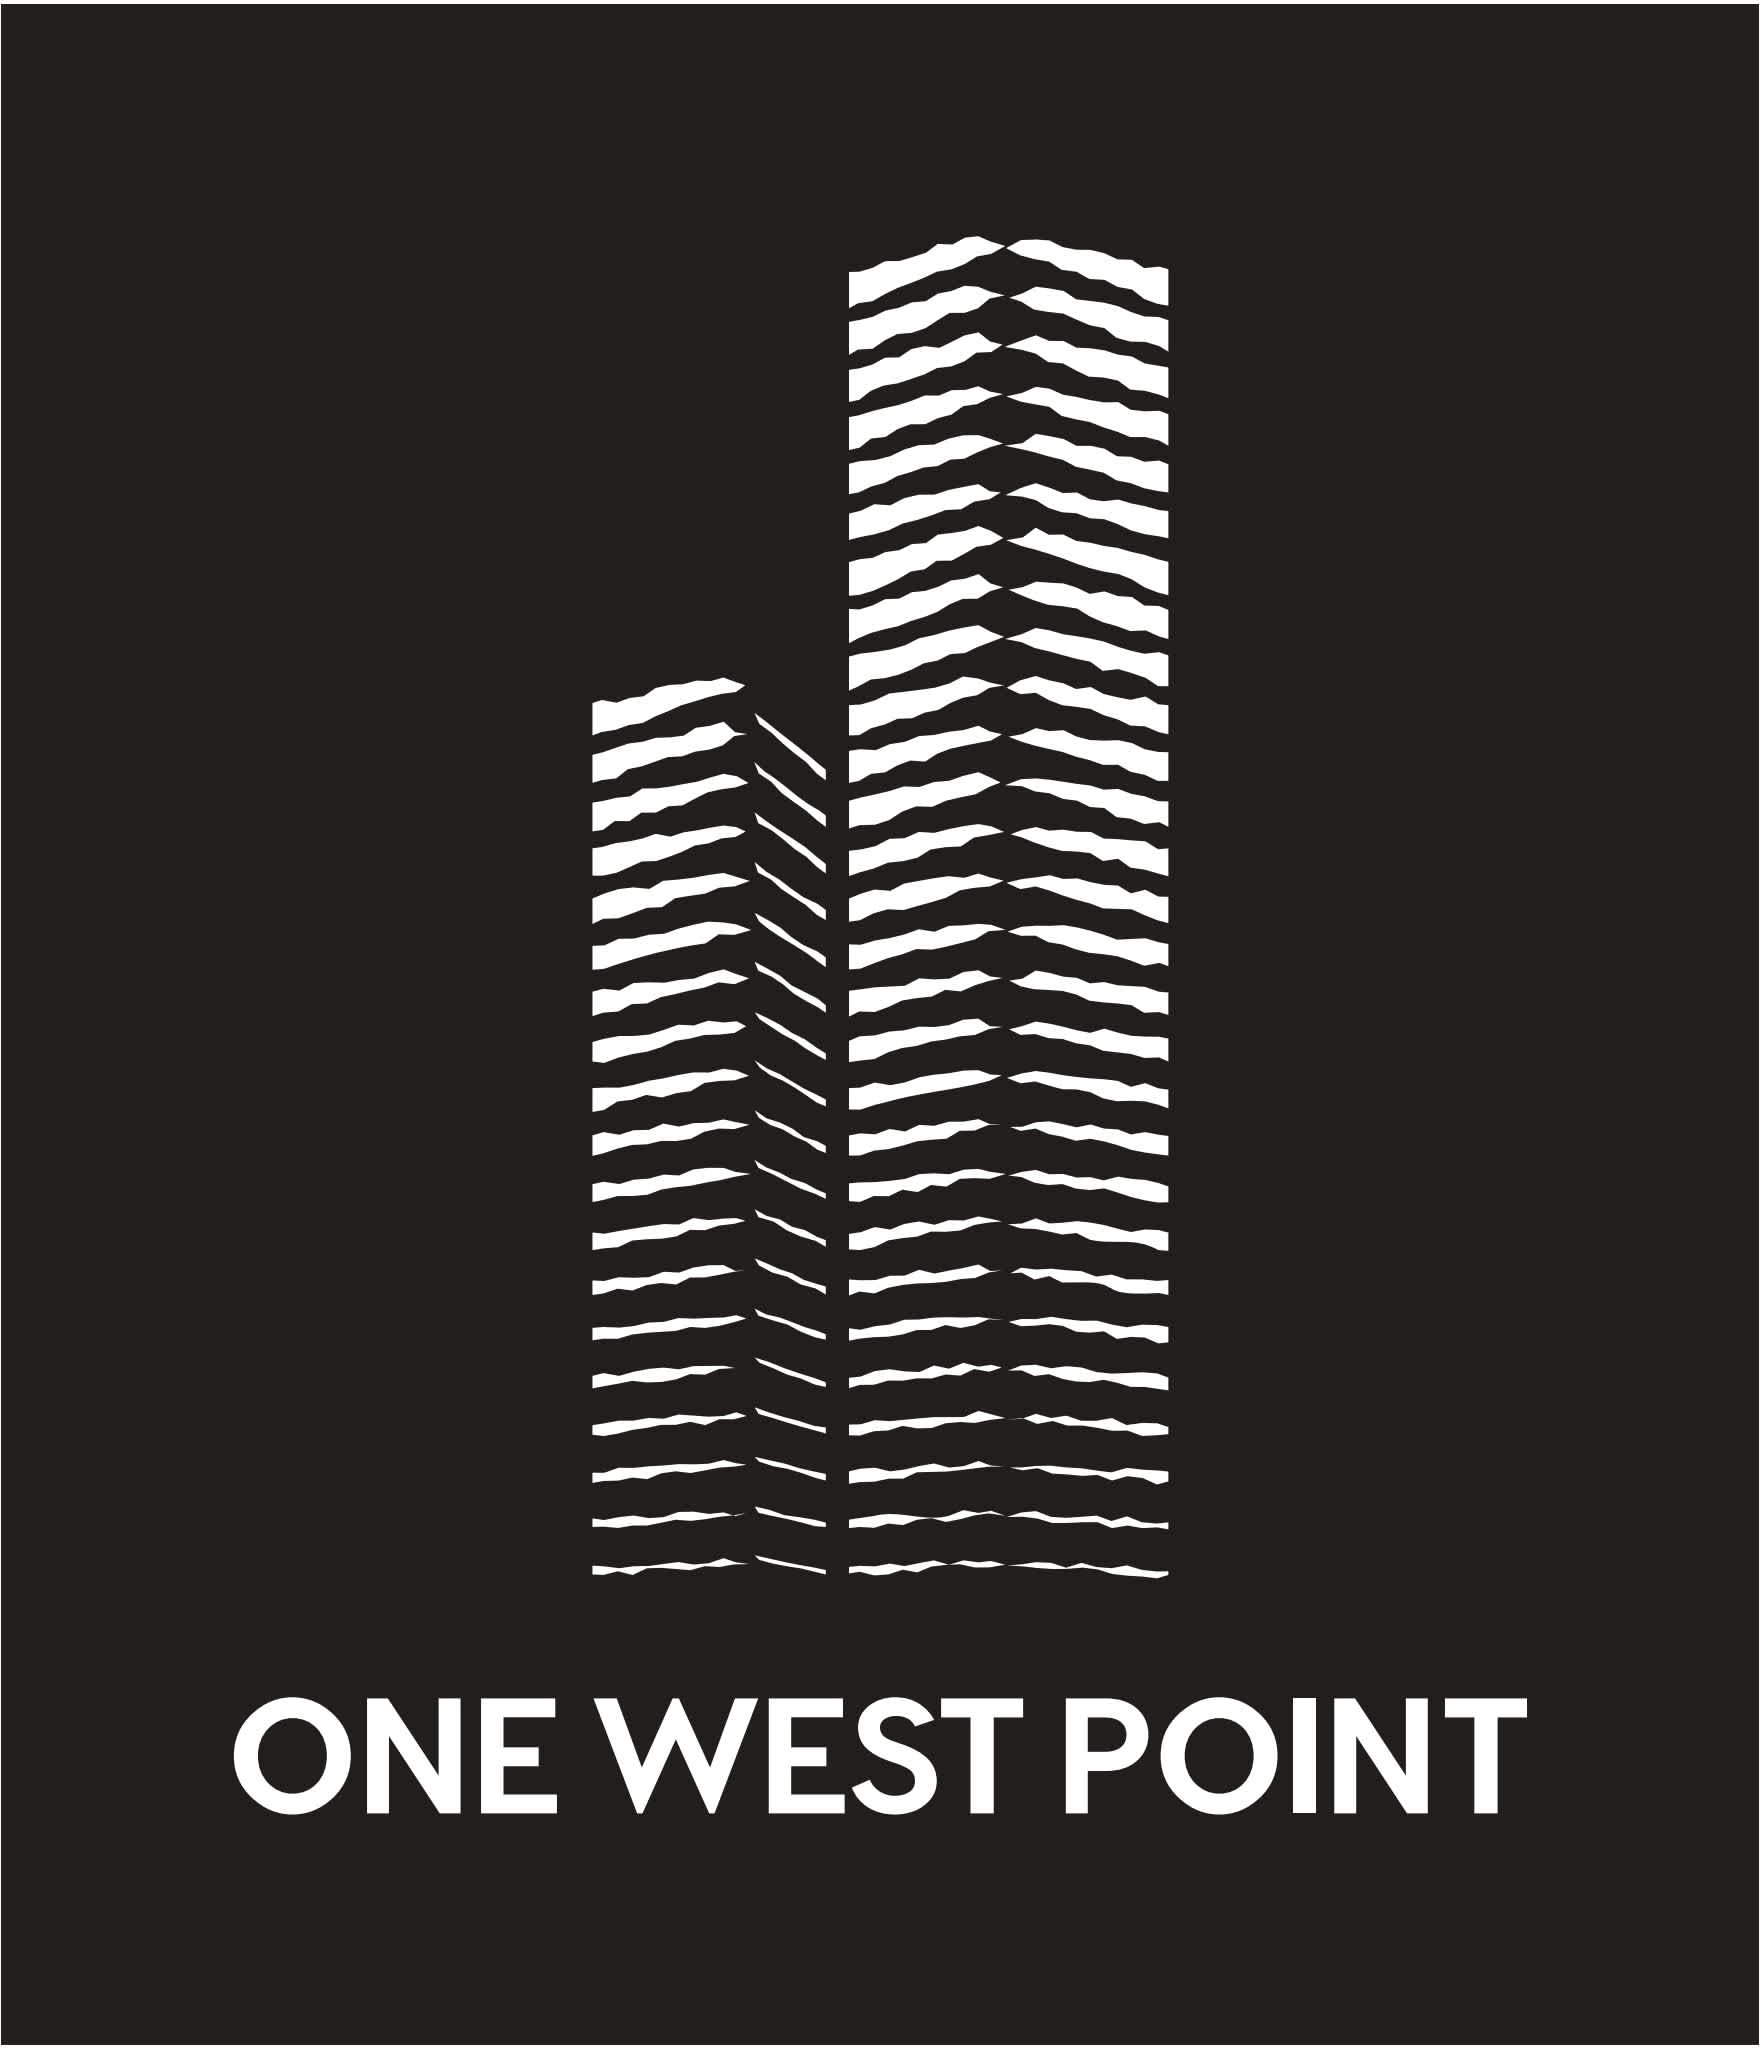 One west point